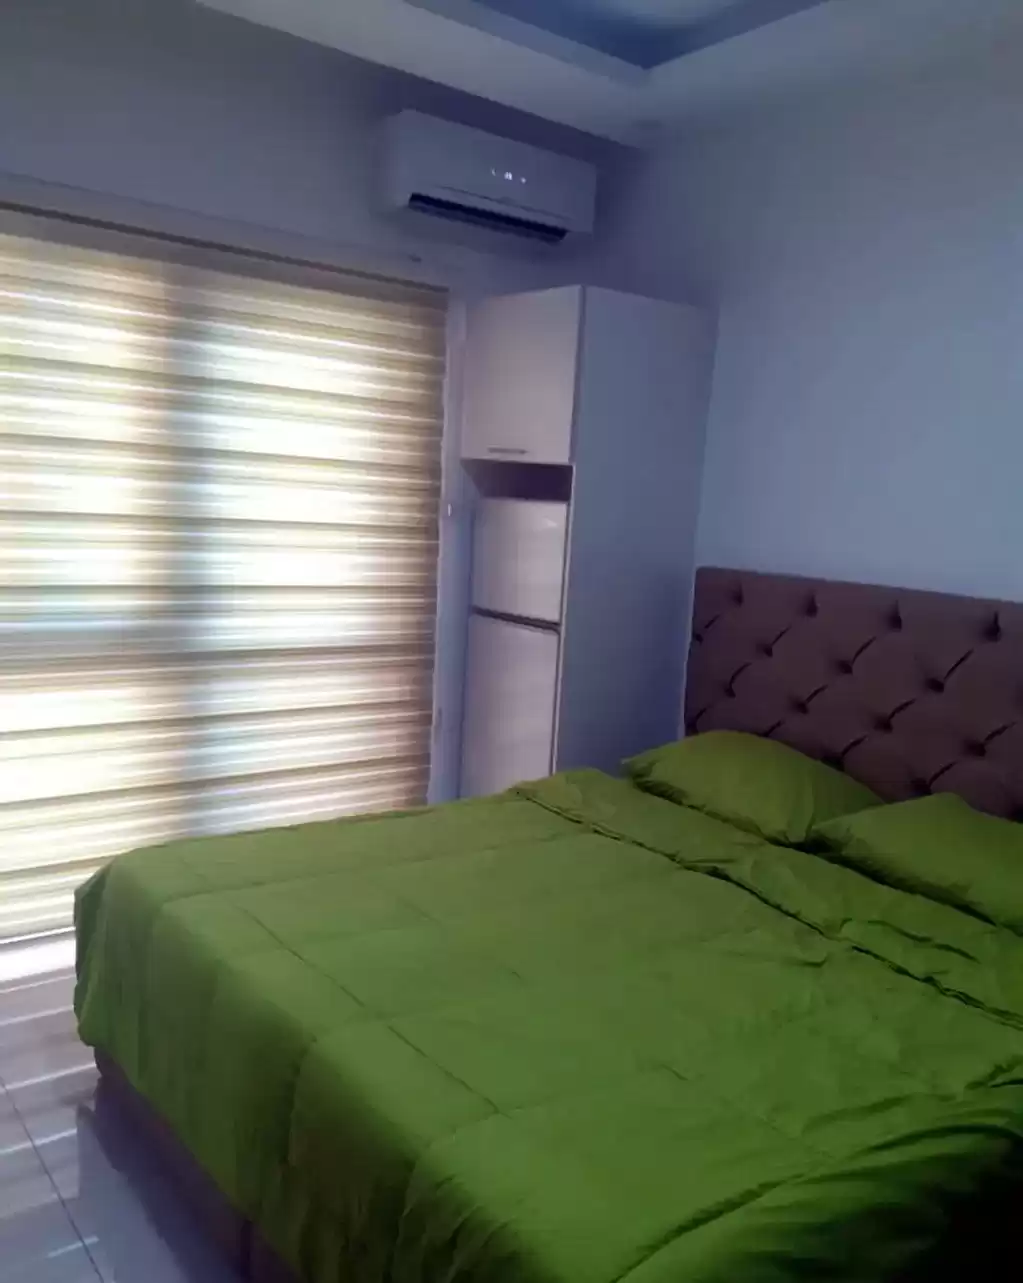 Residential Ready Property Studio F/F Apartment  for rent in Amman #26294 - 1  image 